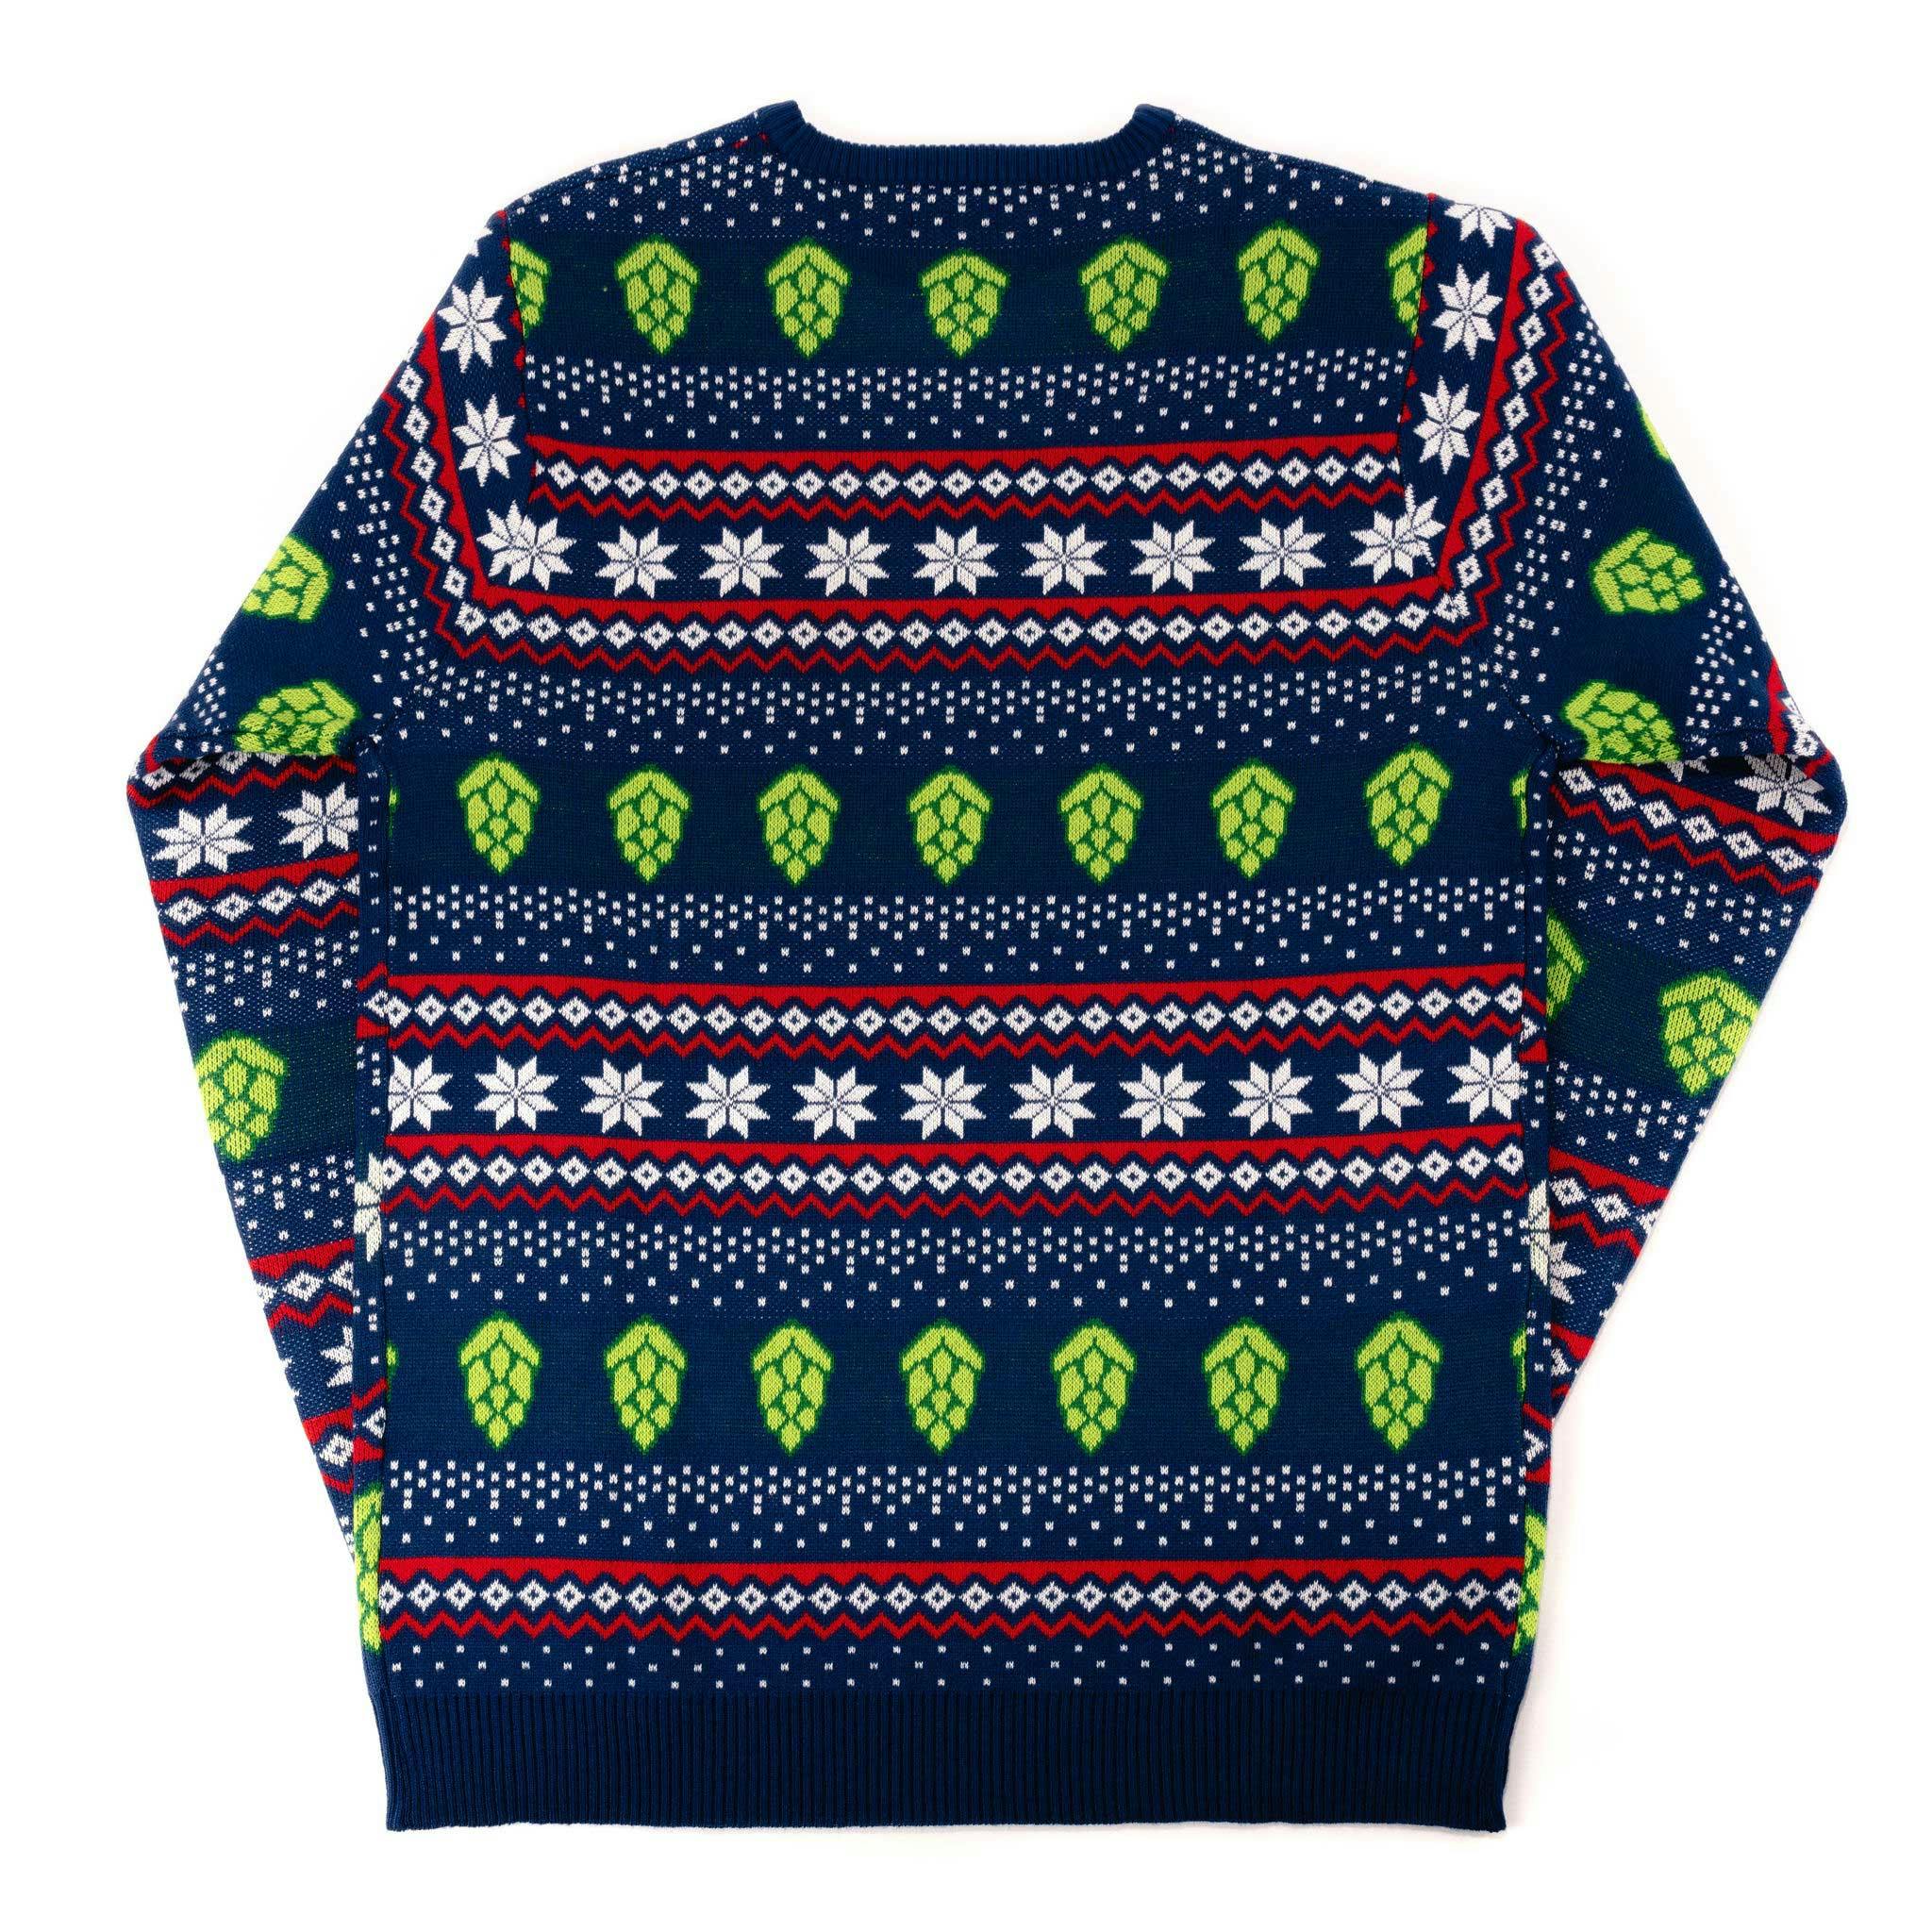 Holiday Knit Sweater | Sierra Nevada Brewing Co.